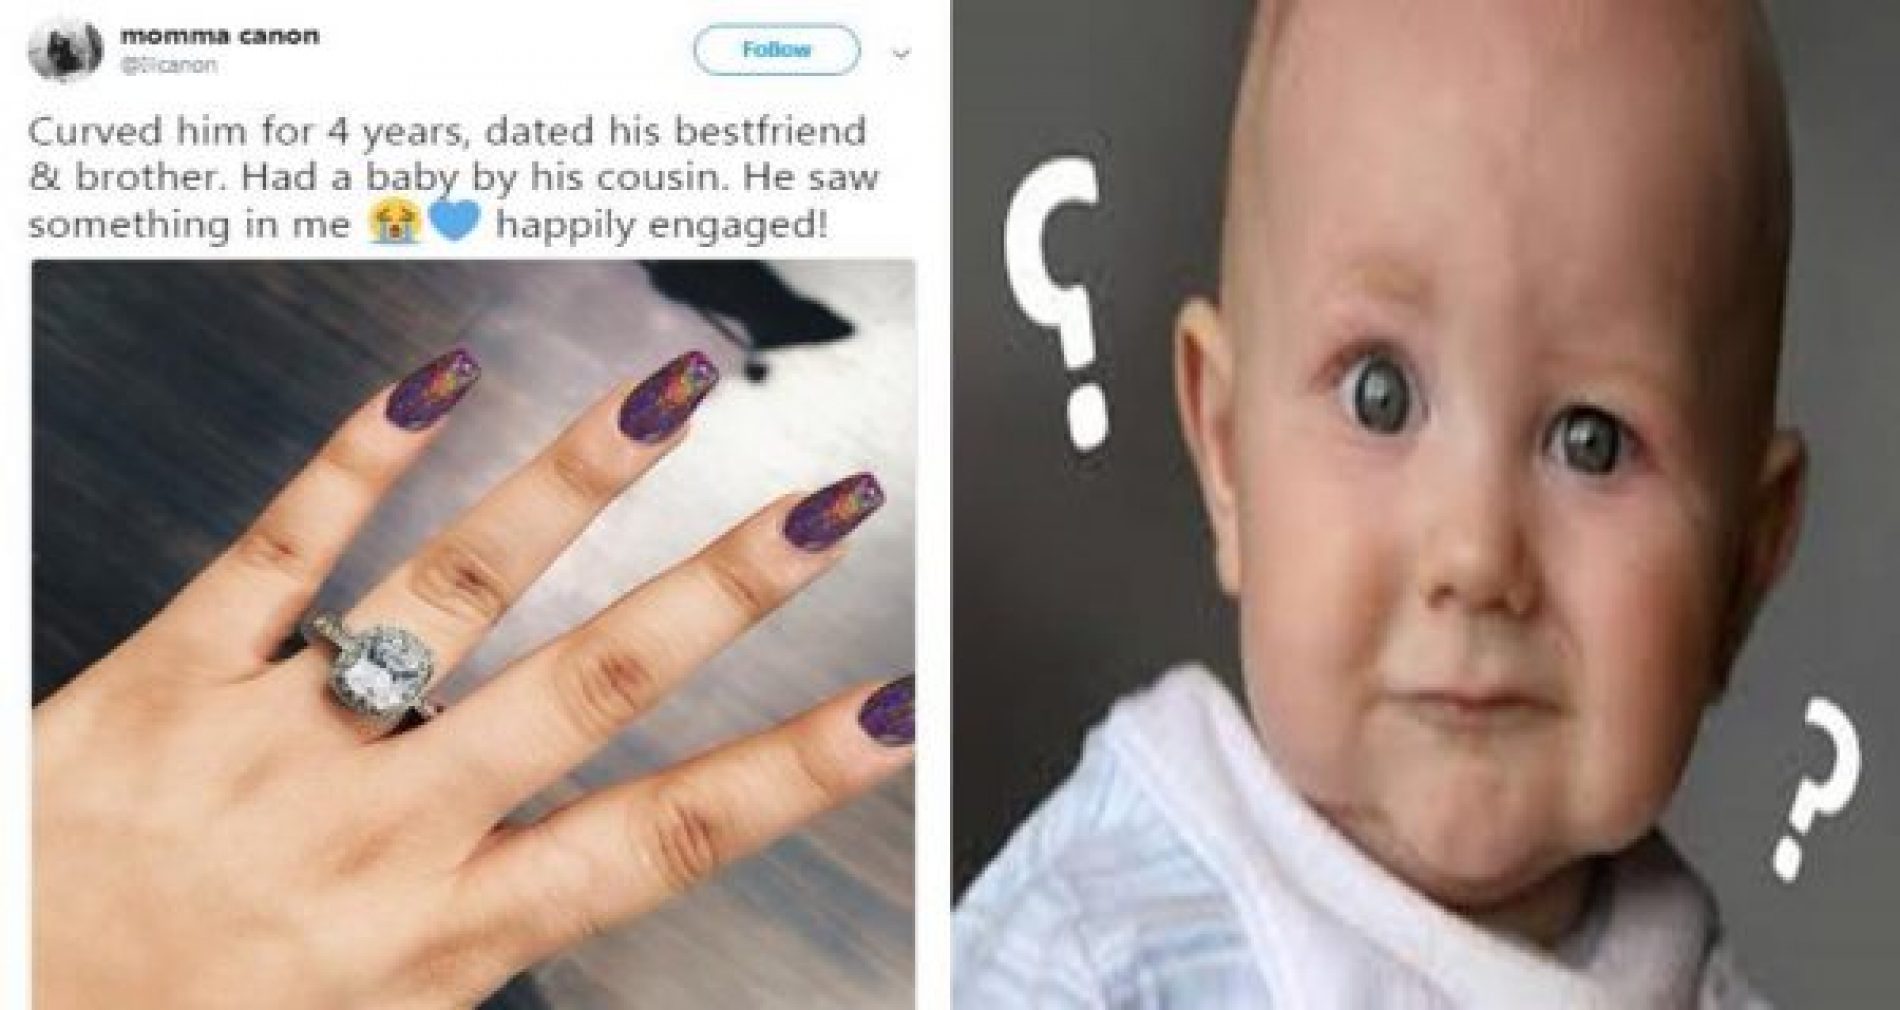 LOVE: He got Her engaged, despite dating his best-friend, brother and having a baby for his cousin… !